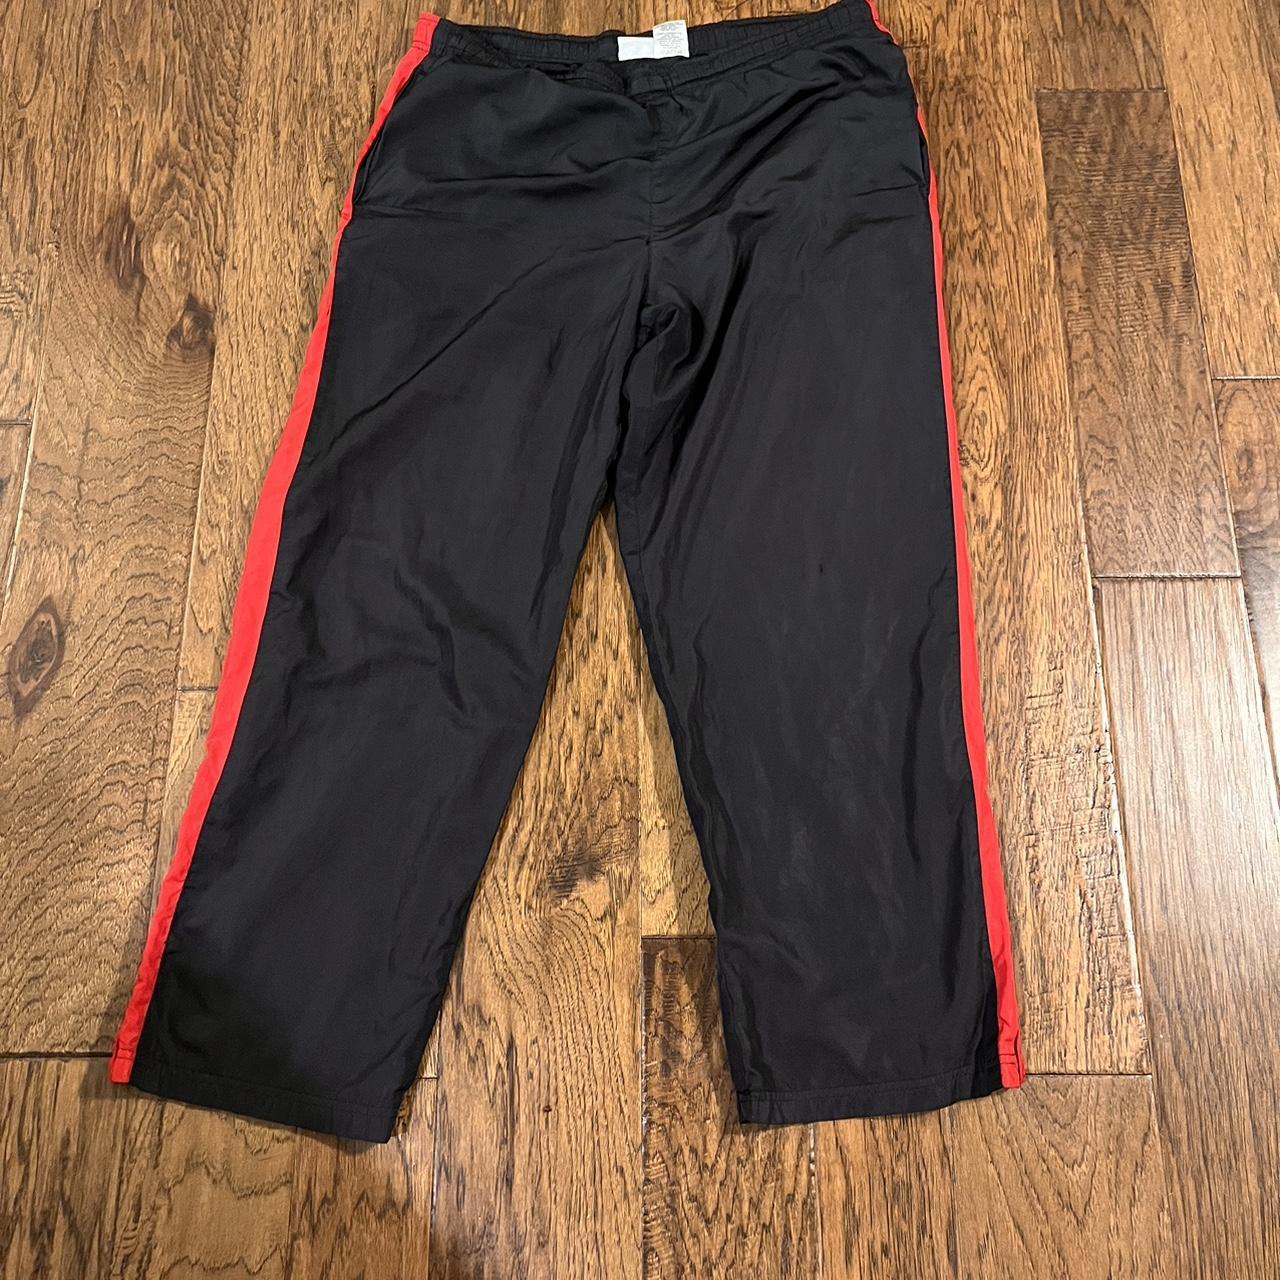 Baggy black track pants with red line on the side... - Depop